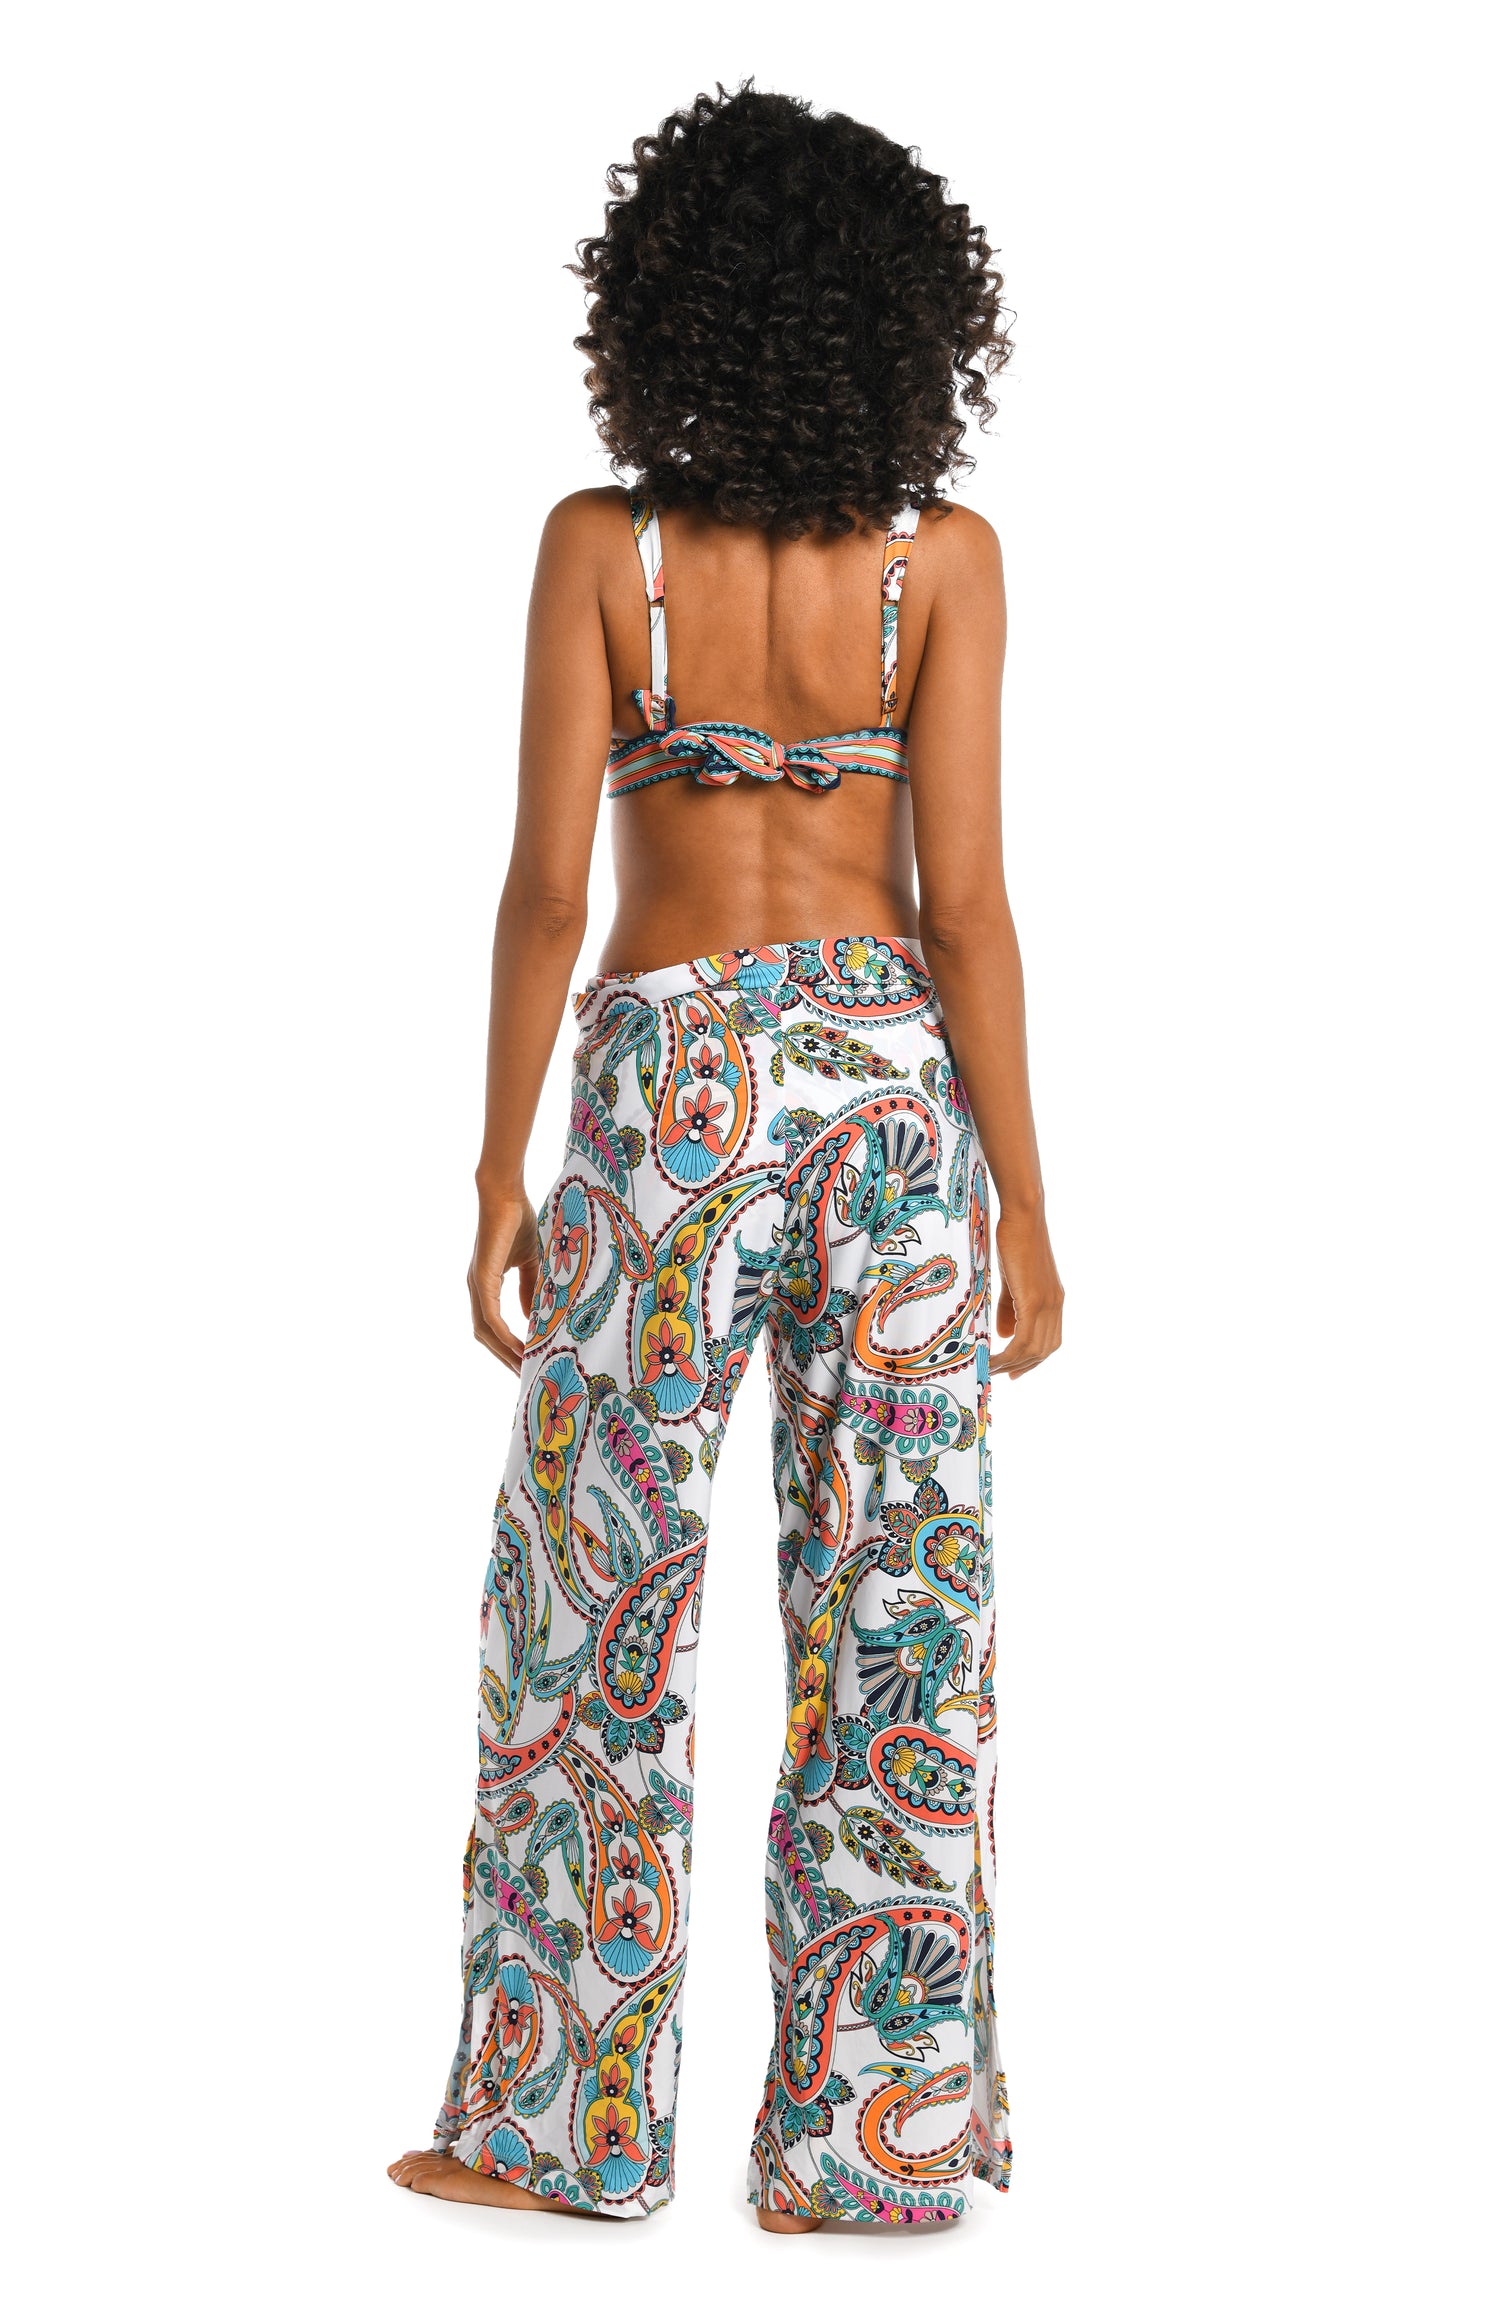 Model is wearing a multi colored paisley printed cover up pants from our Pave the Way collection!